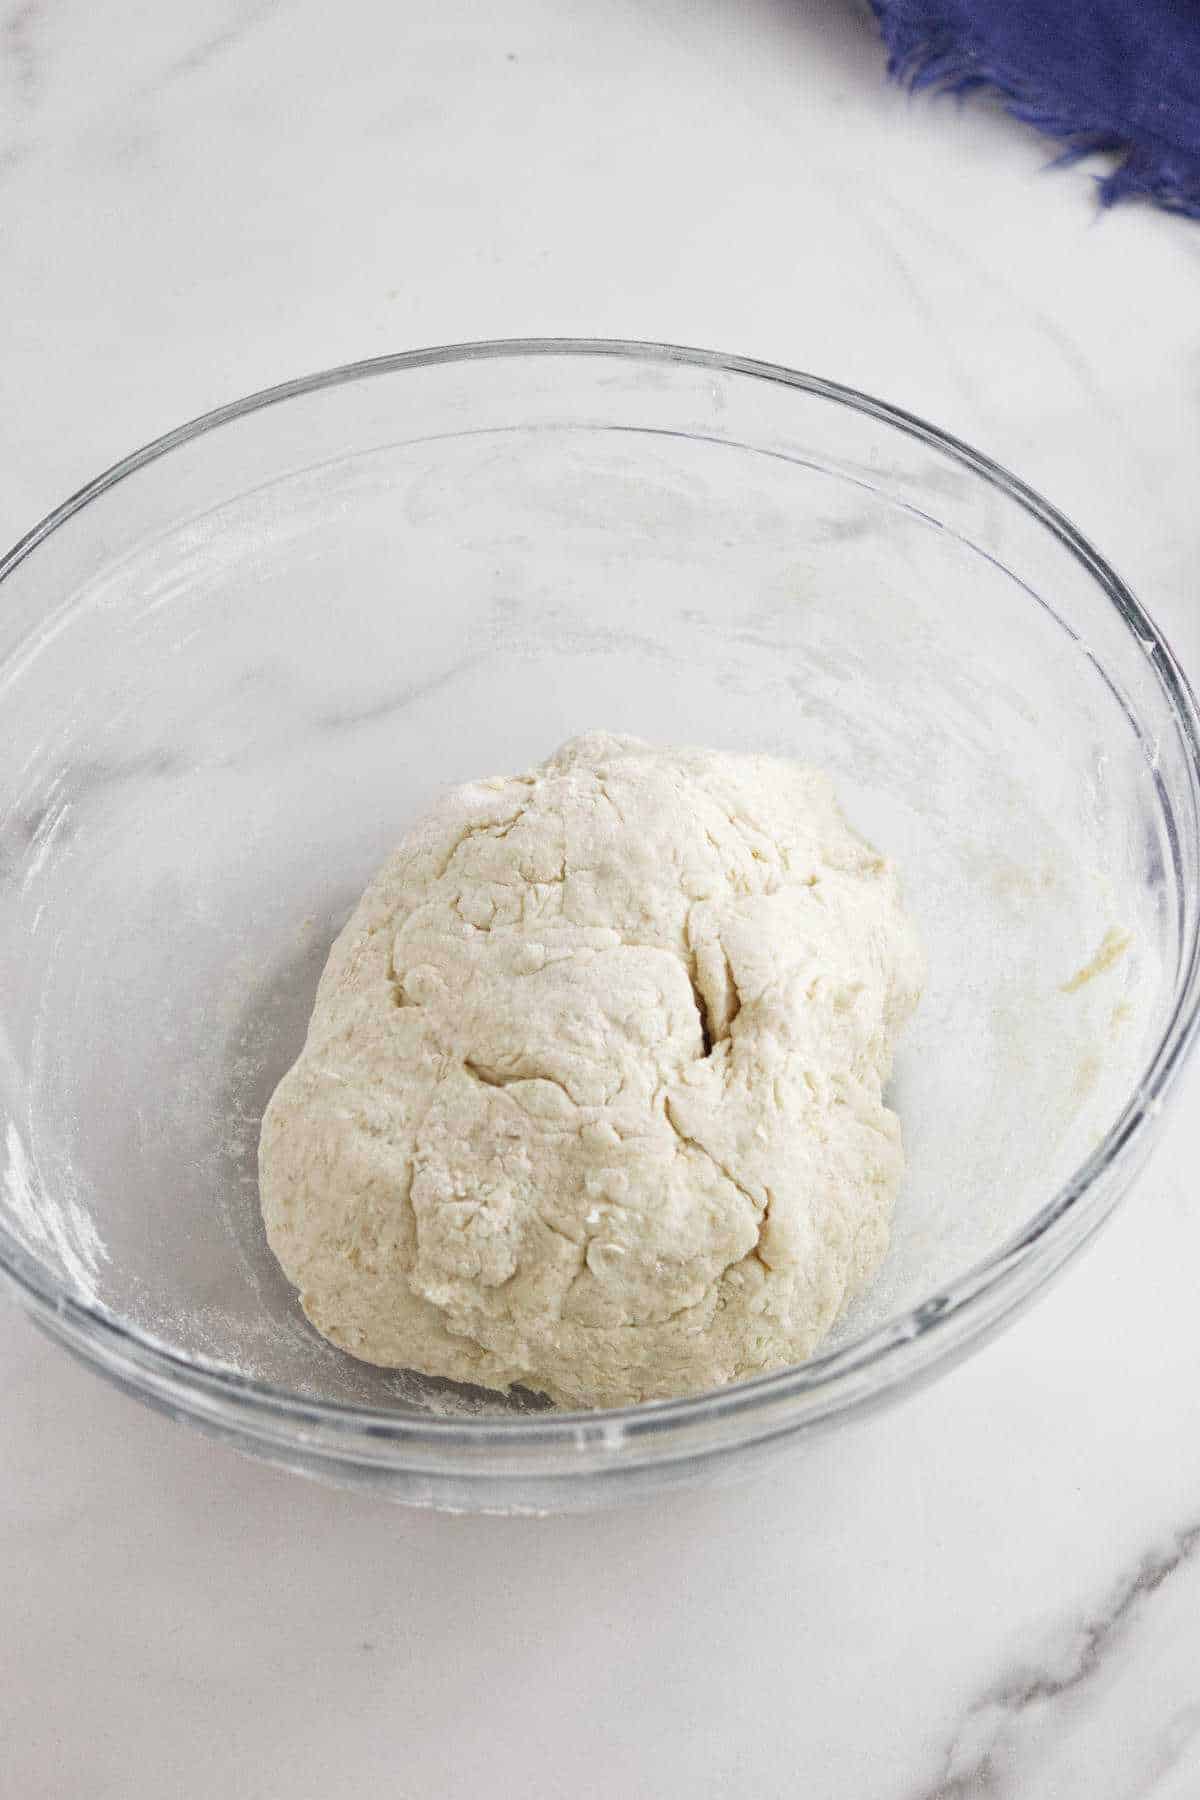 dough in a bowl ready to proof.